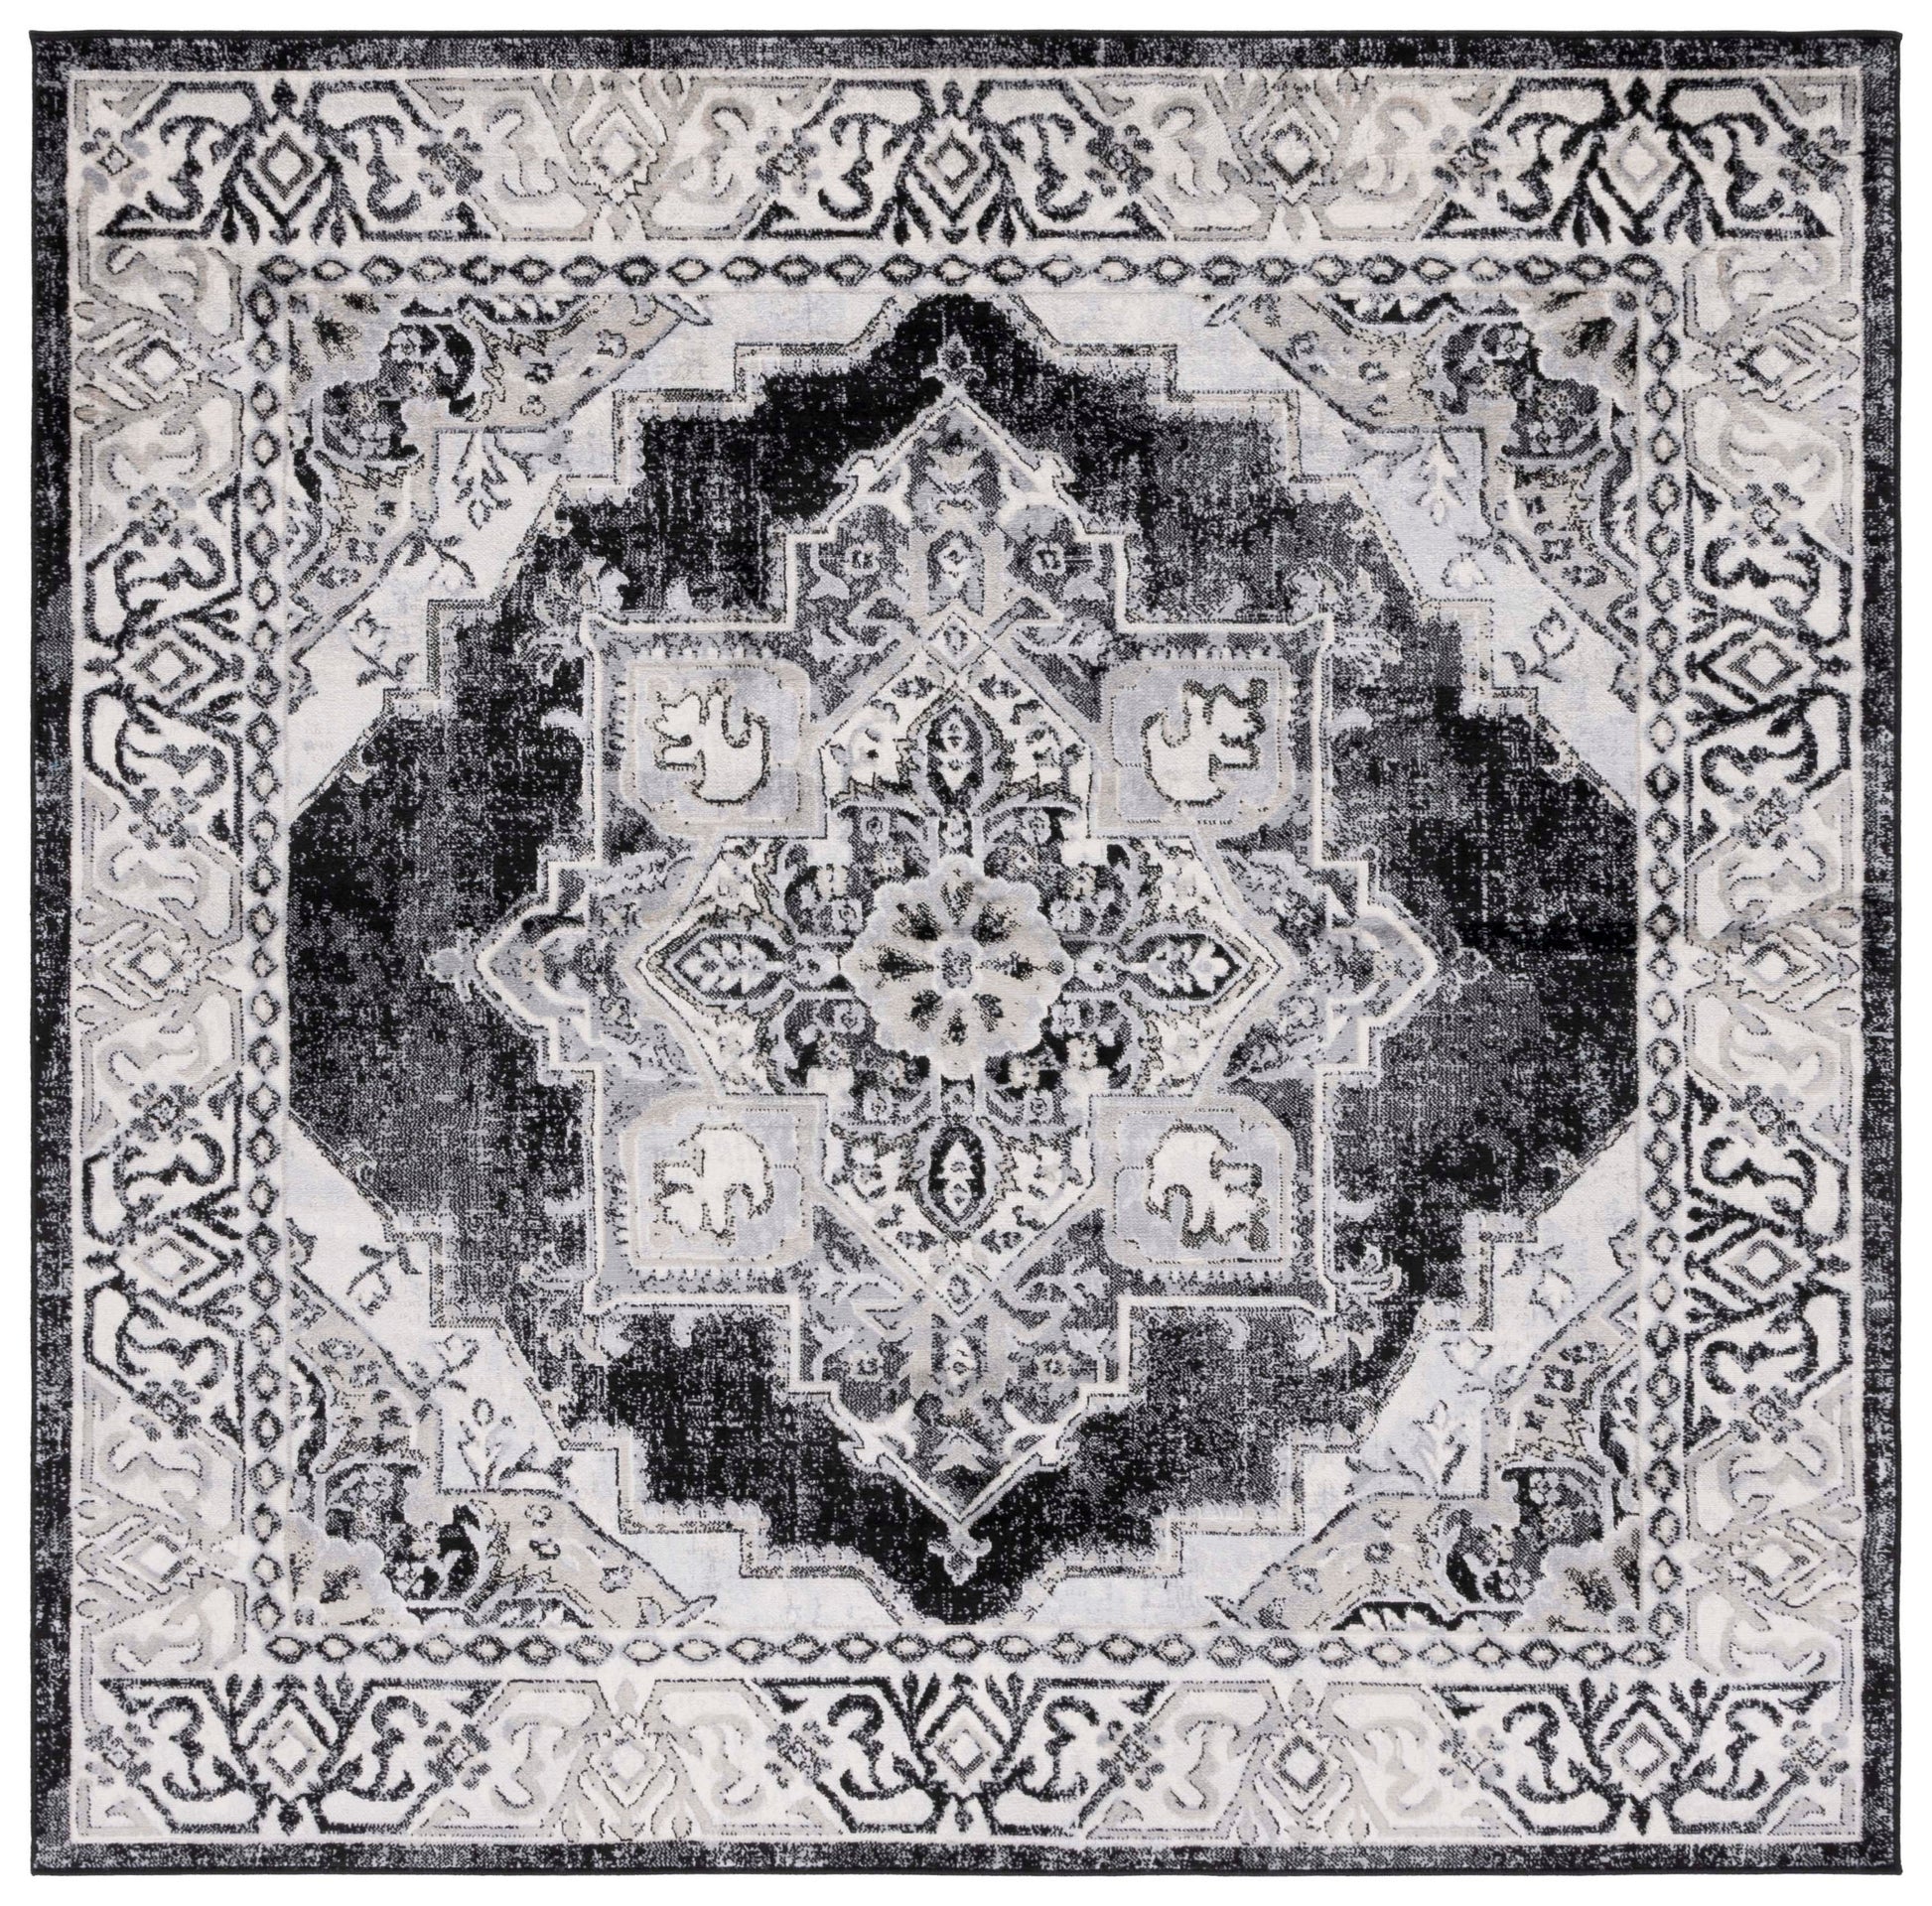 Safavieh Brentwood Bnt861A Ivory/Black Area Rug